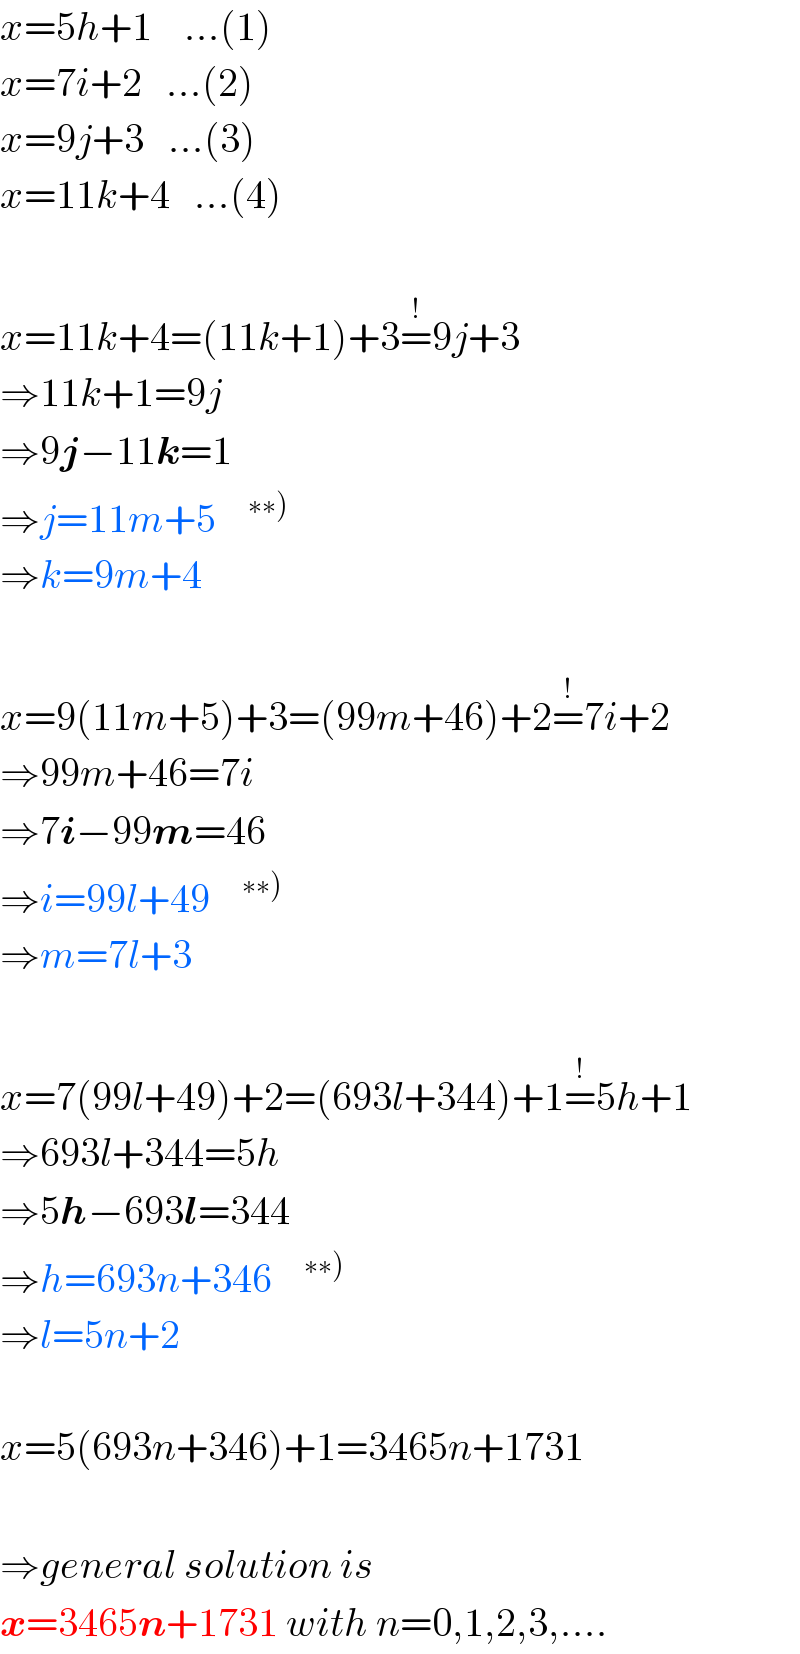 x=5h+1    ...(1)  x=7i+2   ...(2)  x=9j+3   ...(3)  x=11k+4   ...(4)    x=11k+4=(11k+1)+3=^(!) 9j+3  ⇒11k+1=9j  ⇒9j−11k=1  ⇒j=11m+5   ^(∗∗))   ⇒k=9m+4    x=9(11m+5)+3=(99m+46)+2=^(!) 7i+2  ⇒99m+46=7i  ⇒7i−99m=46  ⇒i=99l+49   ^(∗∗))   ⇒m=7l+3    x=7(99l+49)+2=(693l+344)+1=^(!) 5h+1  ⇒693l+344=5h  ⇒5h−693l=344  ⇒h=693n+346   ^(∗∗))   ⇒l=5n+2    x=5(693n+346)+1=3465n+1731    ⇒general solution is  x=3465n+1731 with n=0,1,2,3,....  